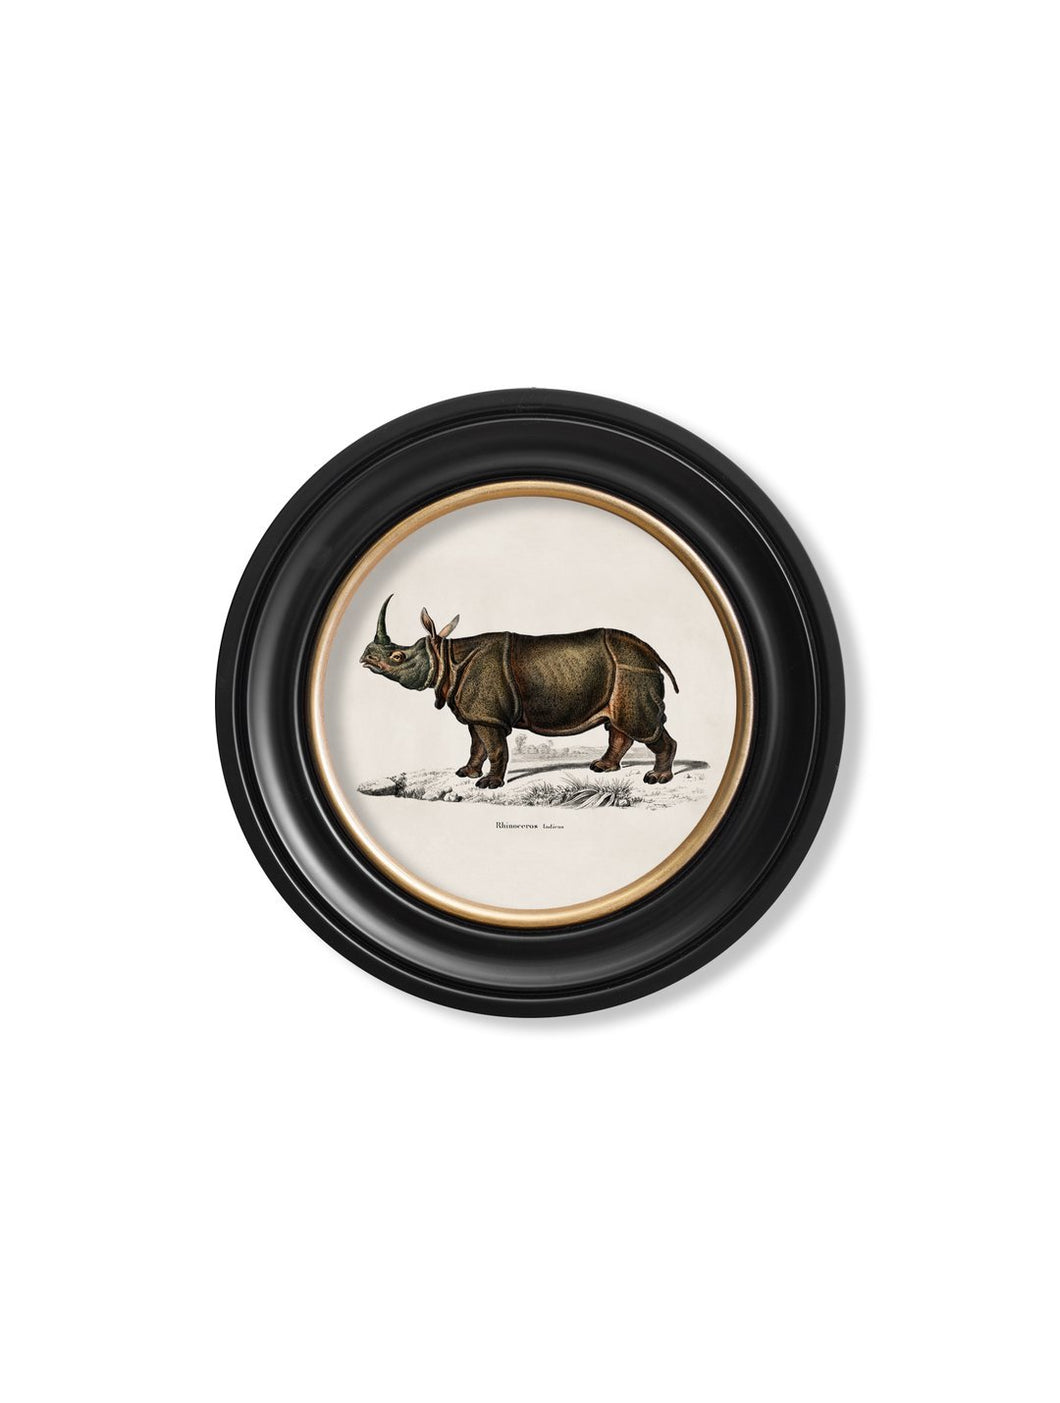 Rhino & Hippo - Round Frames - Referenced From 1846 IllustrationsVintage Frog T/APictures & Prints